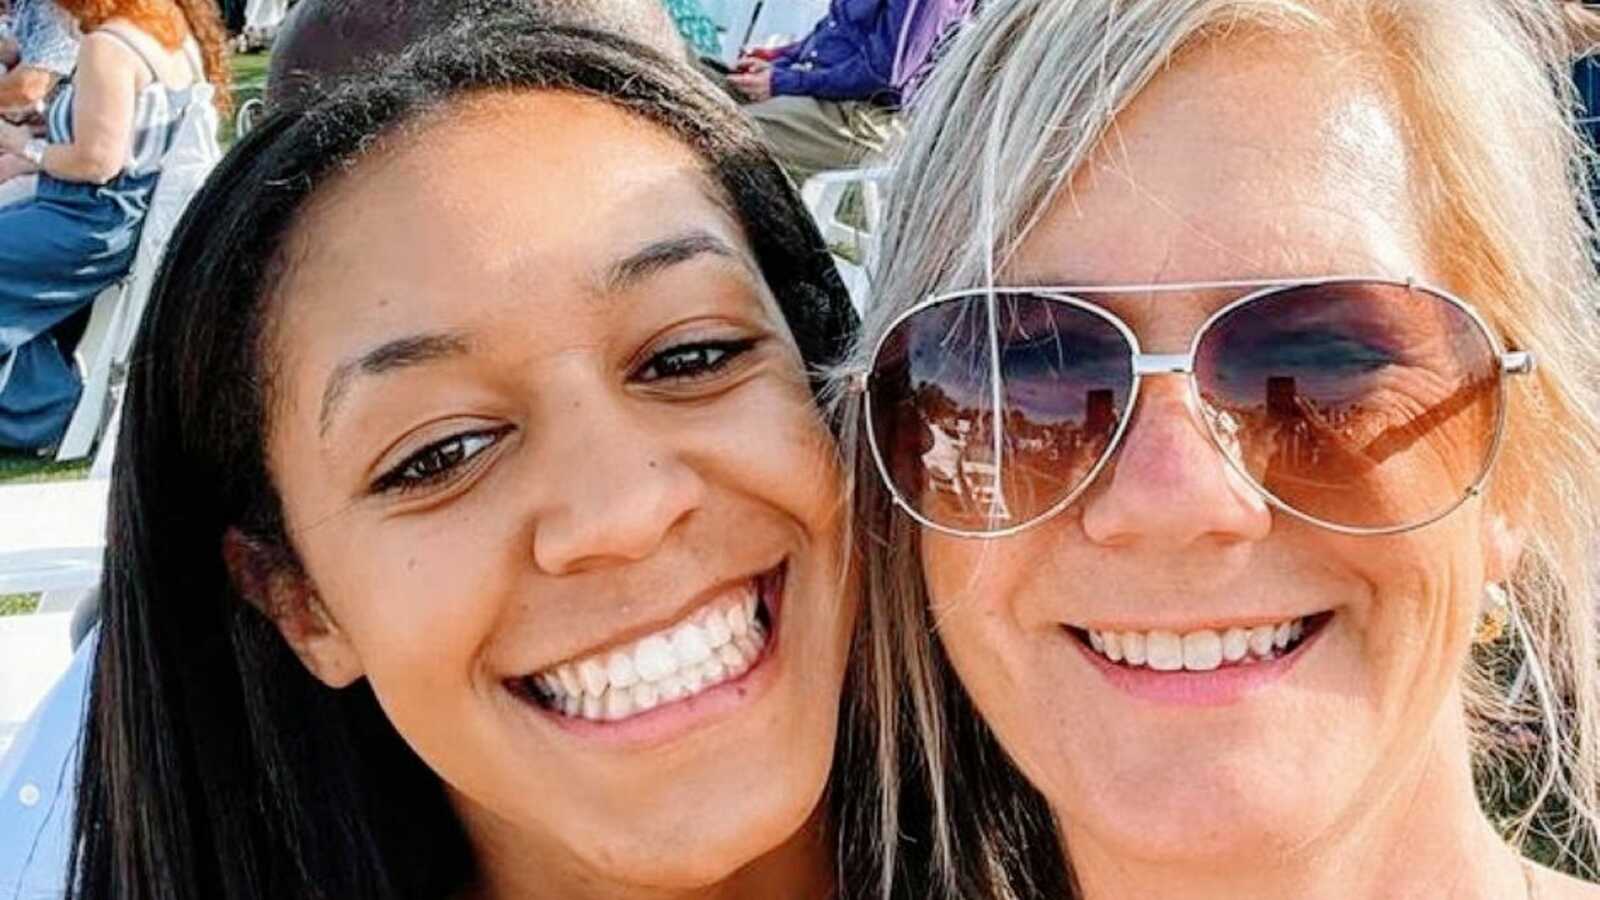 Mom and daughter smile big for a selfie while spending some quality time together